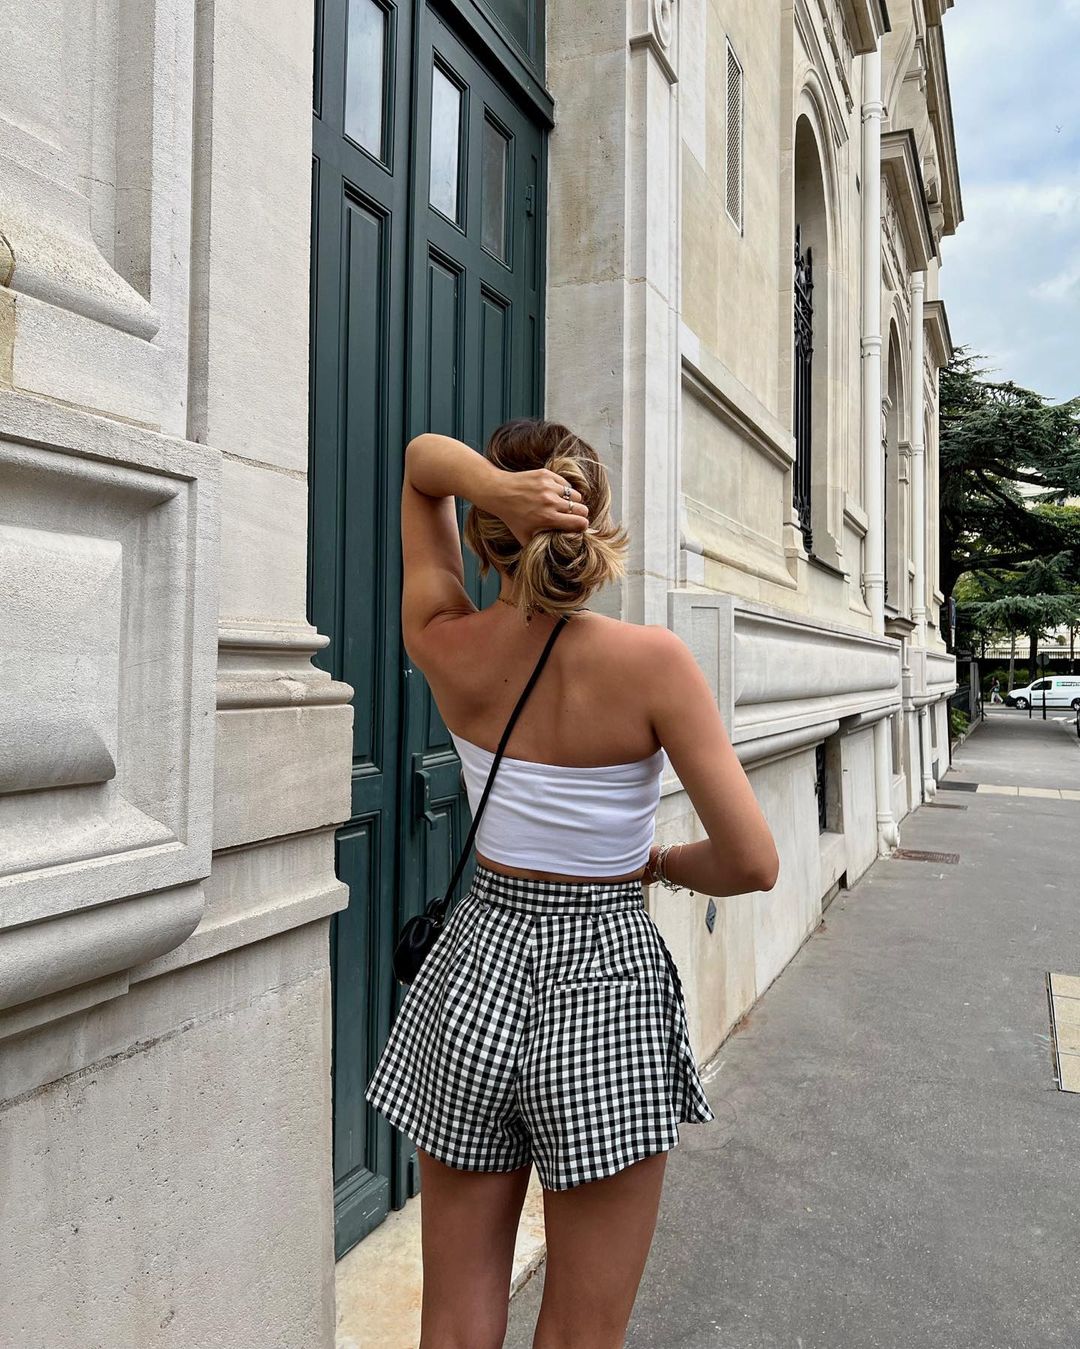 The Summer 2022 Street Style Trends You Need To Know images 39